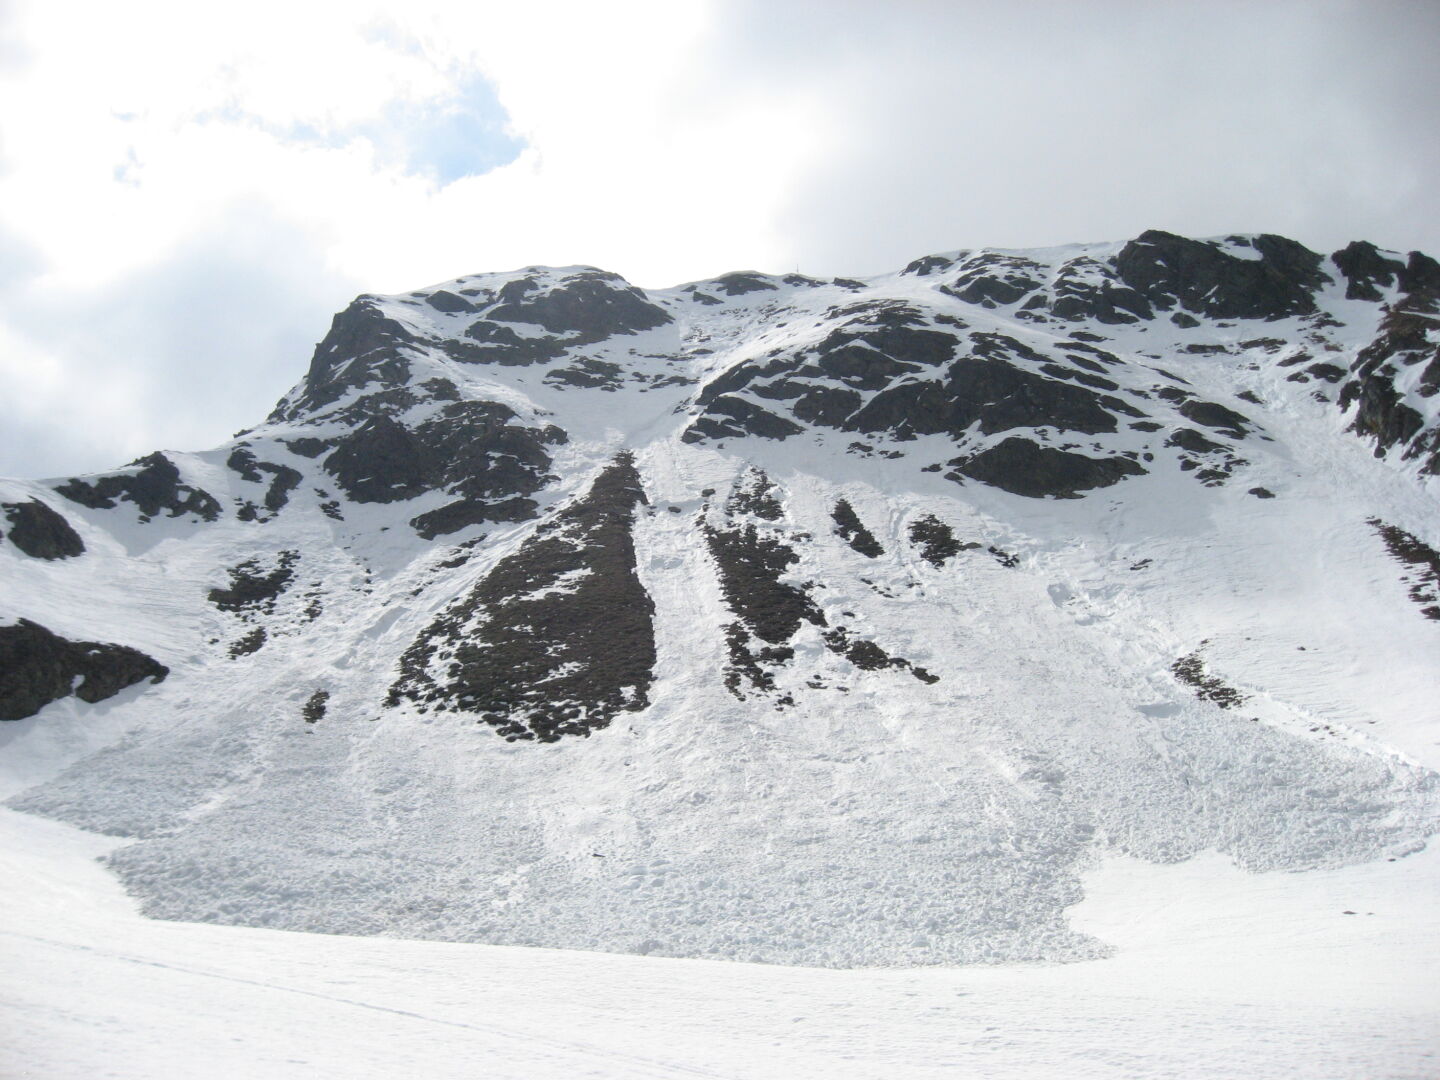 The North Wall of the Windspitz. The avalanche must have come down only a few days ago.